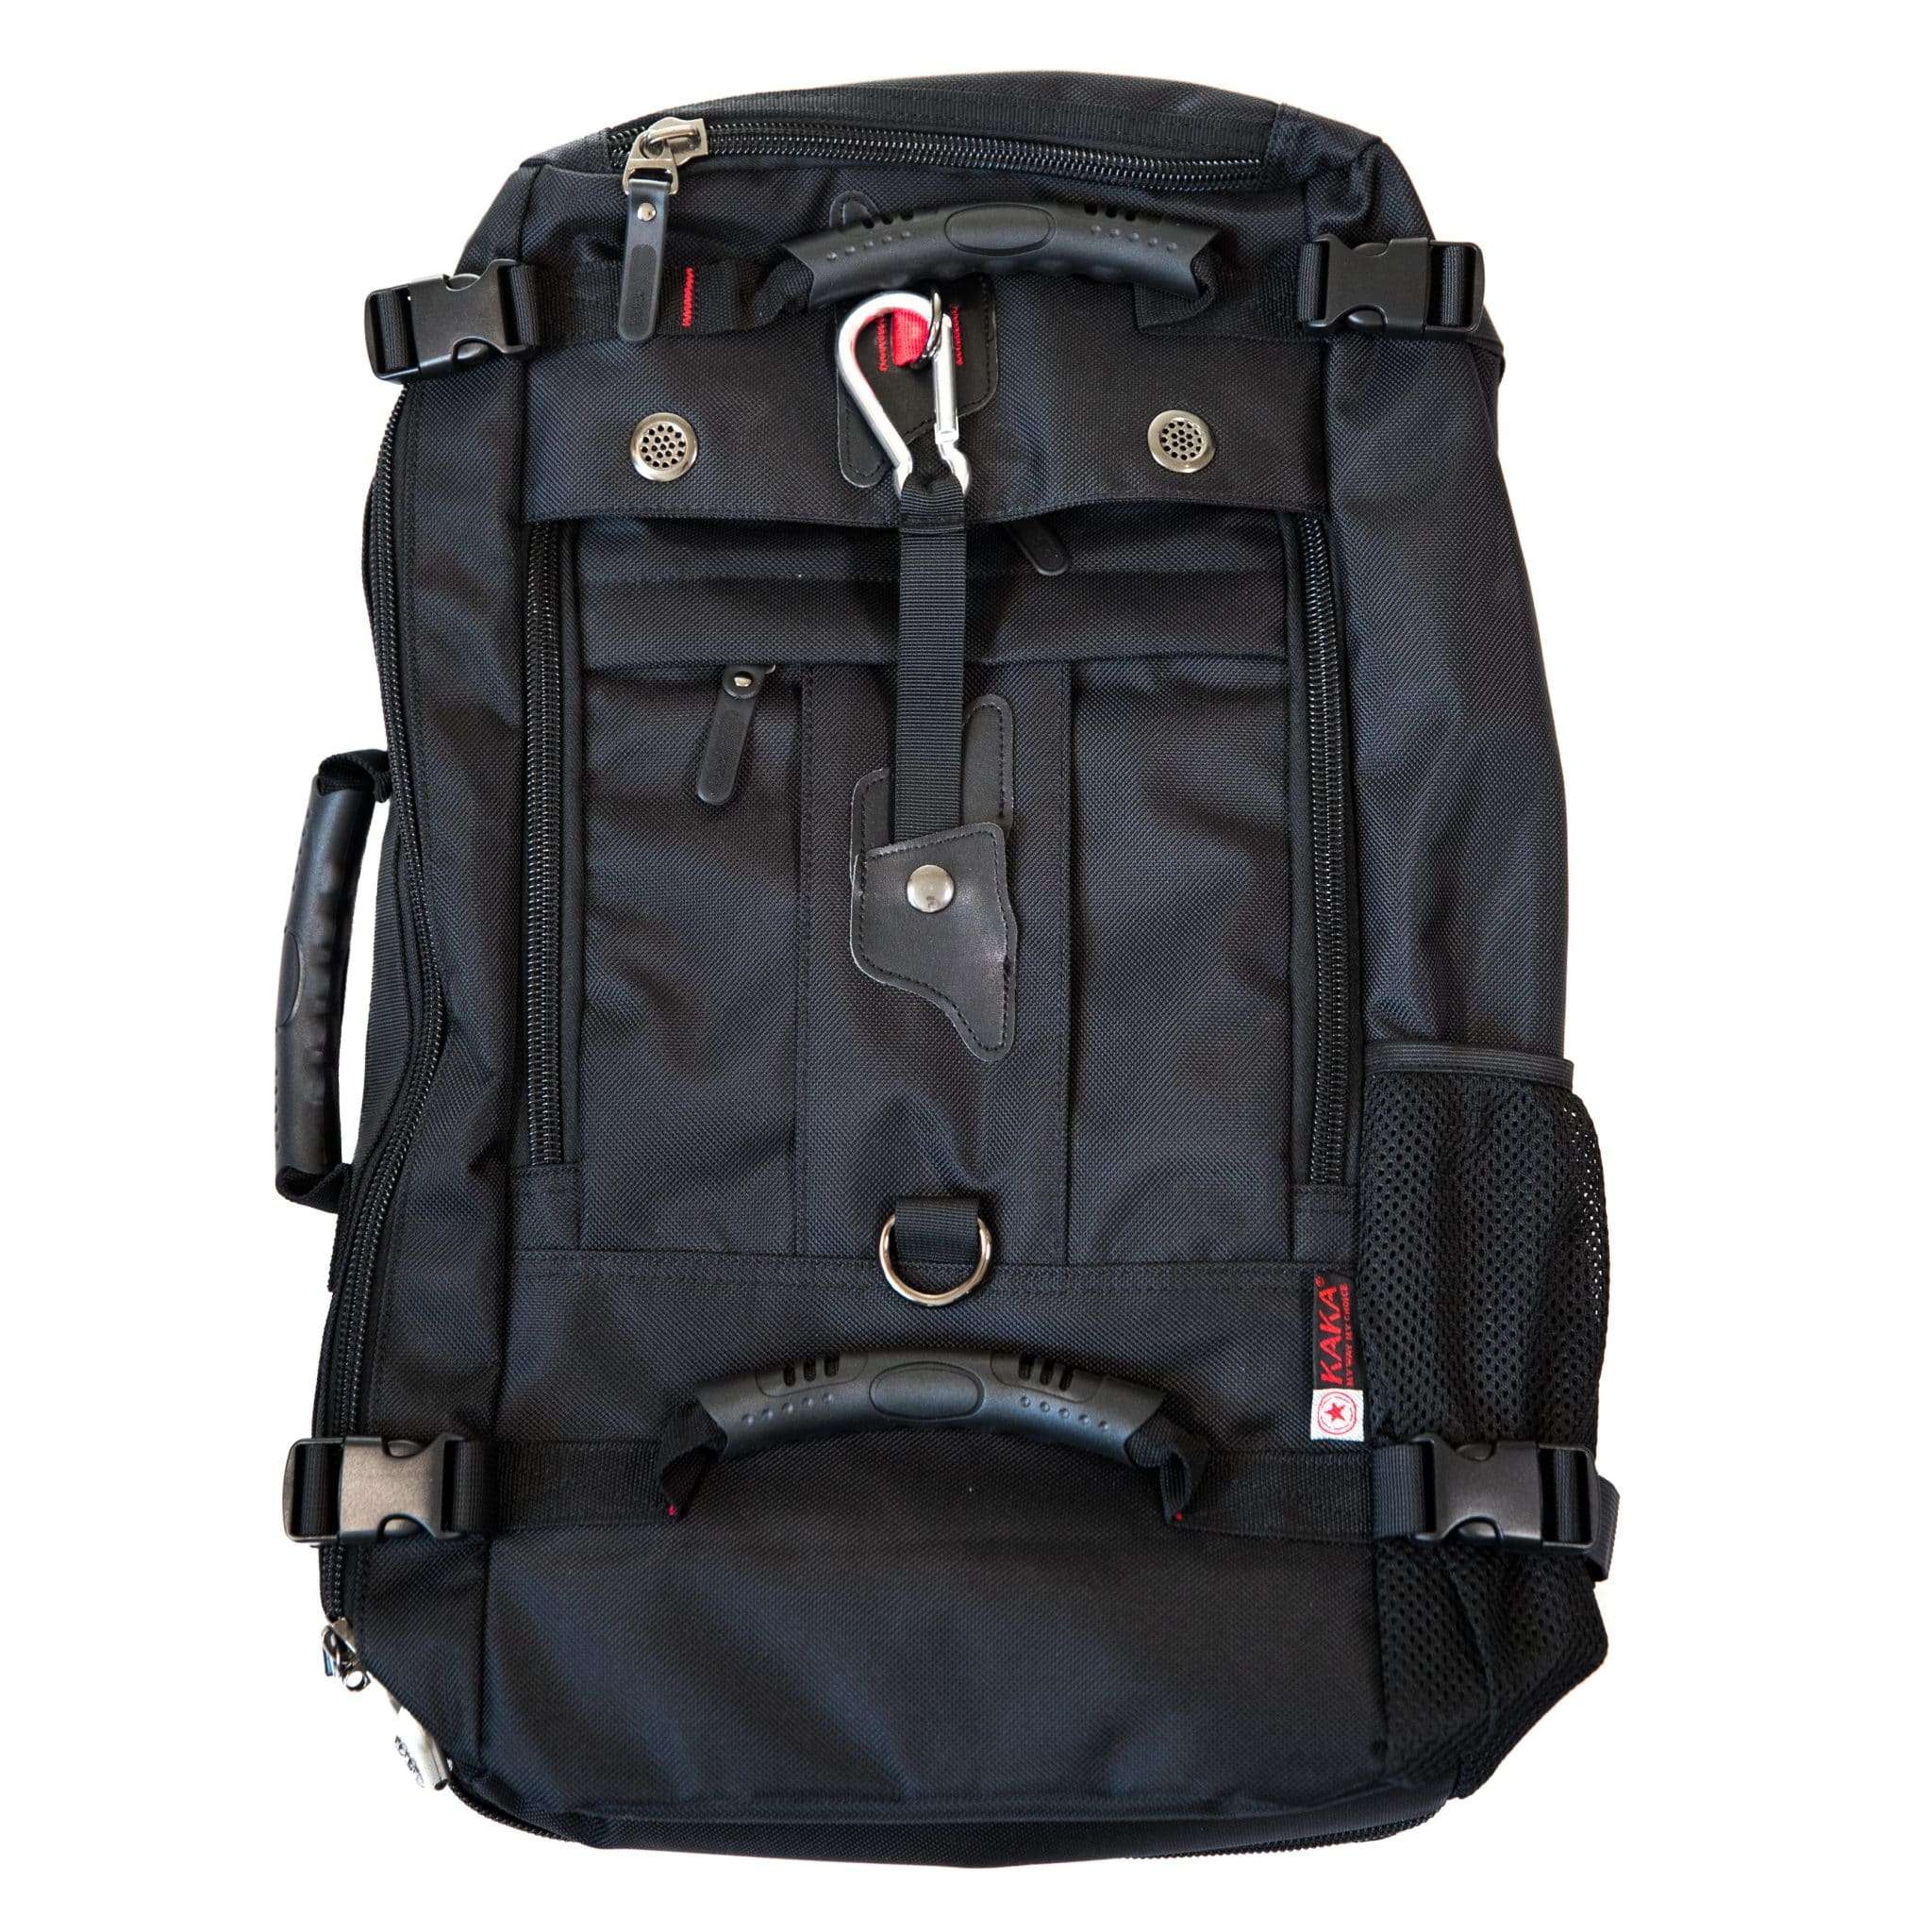 Hand Luggage Backpack - Adjustable Straps, Heavy Duty 1680D Polyester ...